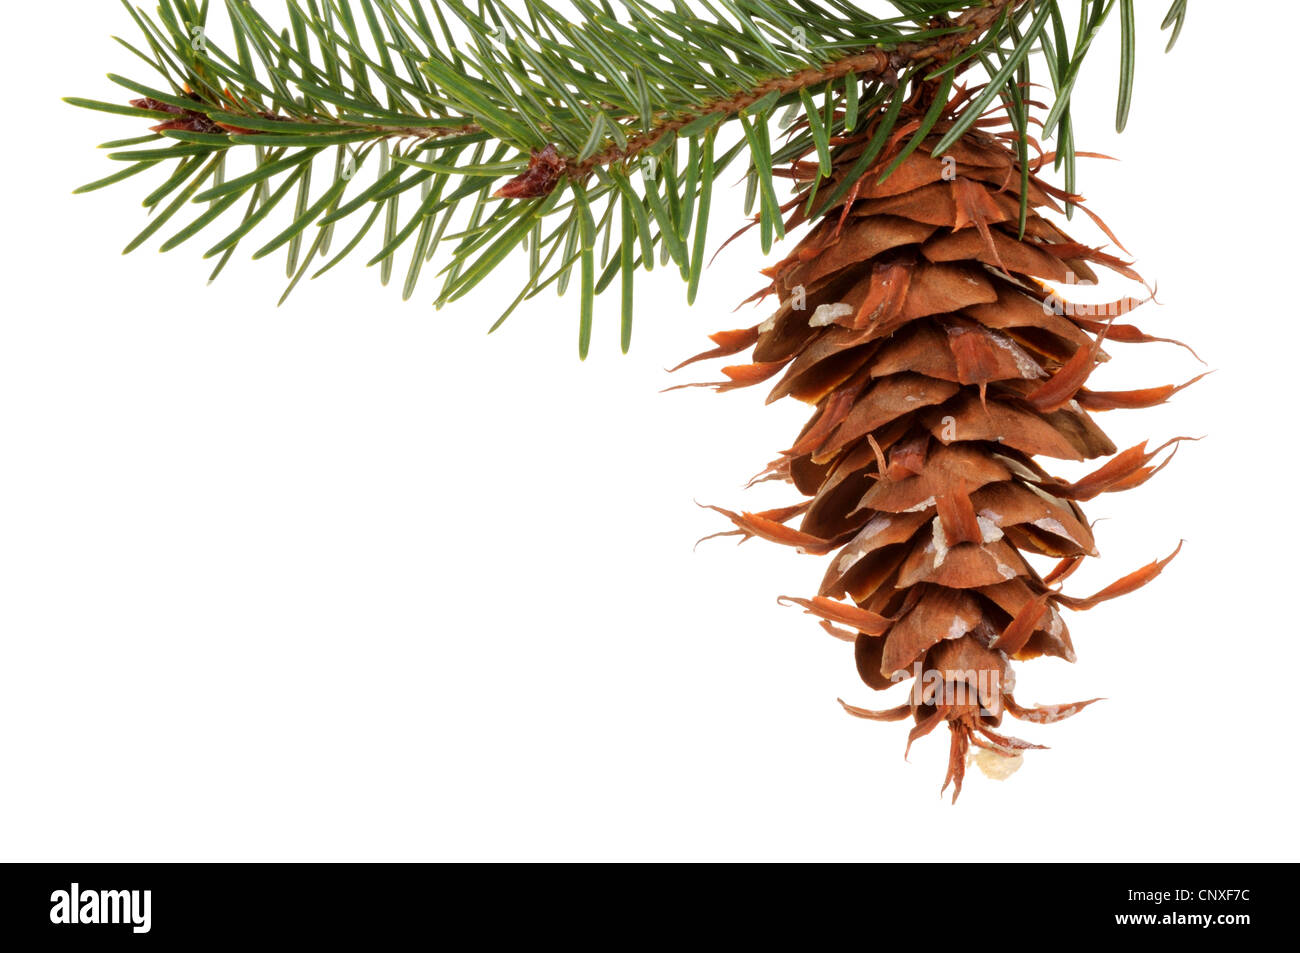 Douglas fir (Pseudotsuga menziesii), branch with cone, cut out Stock Photo